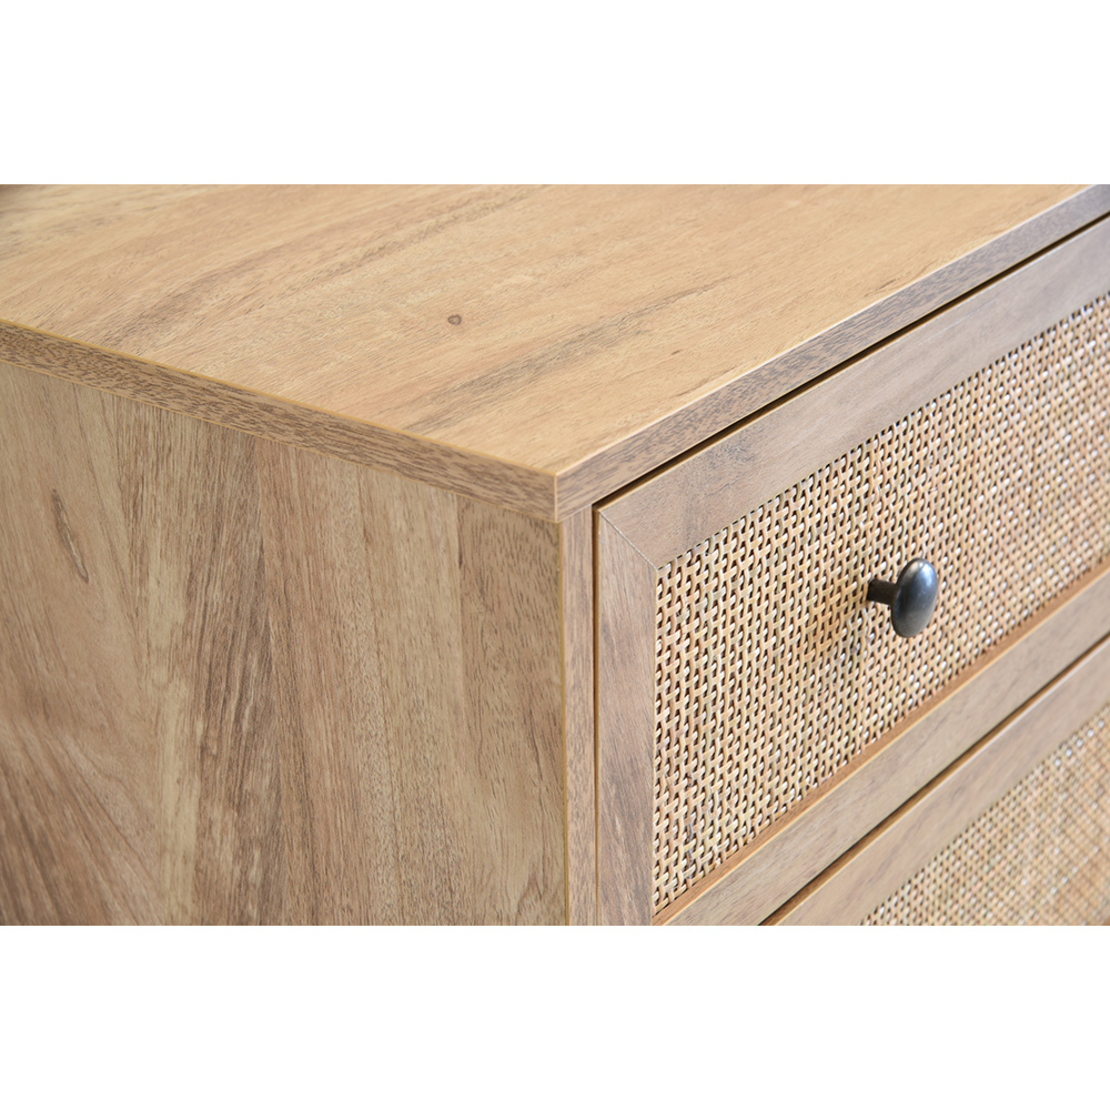 AMMOS COMMODE 3DRAWERS CHIPBOARD WITH MELAMINE CARTA NATURAL WITH RATTAN E1 PRC